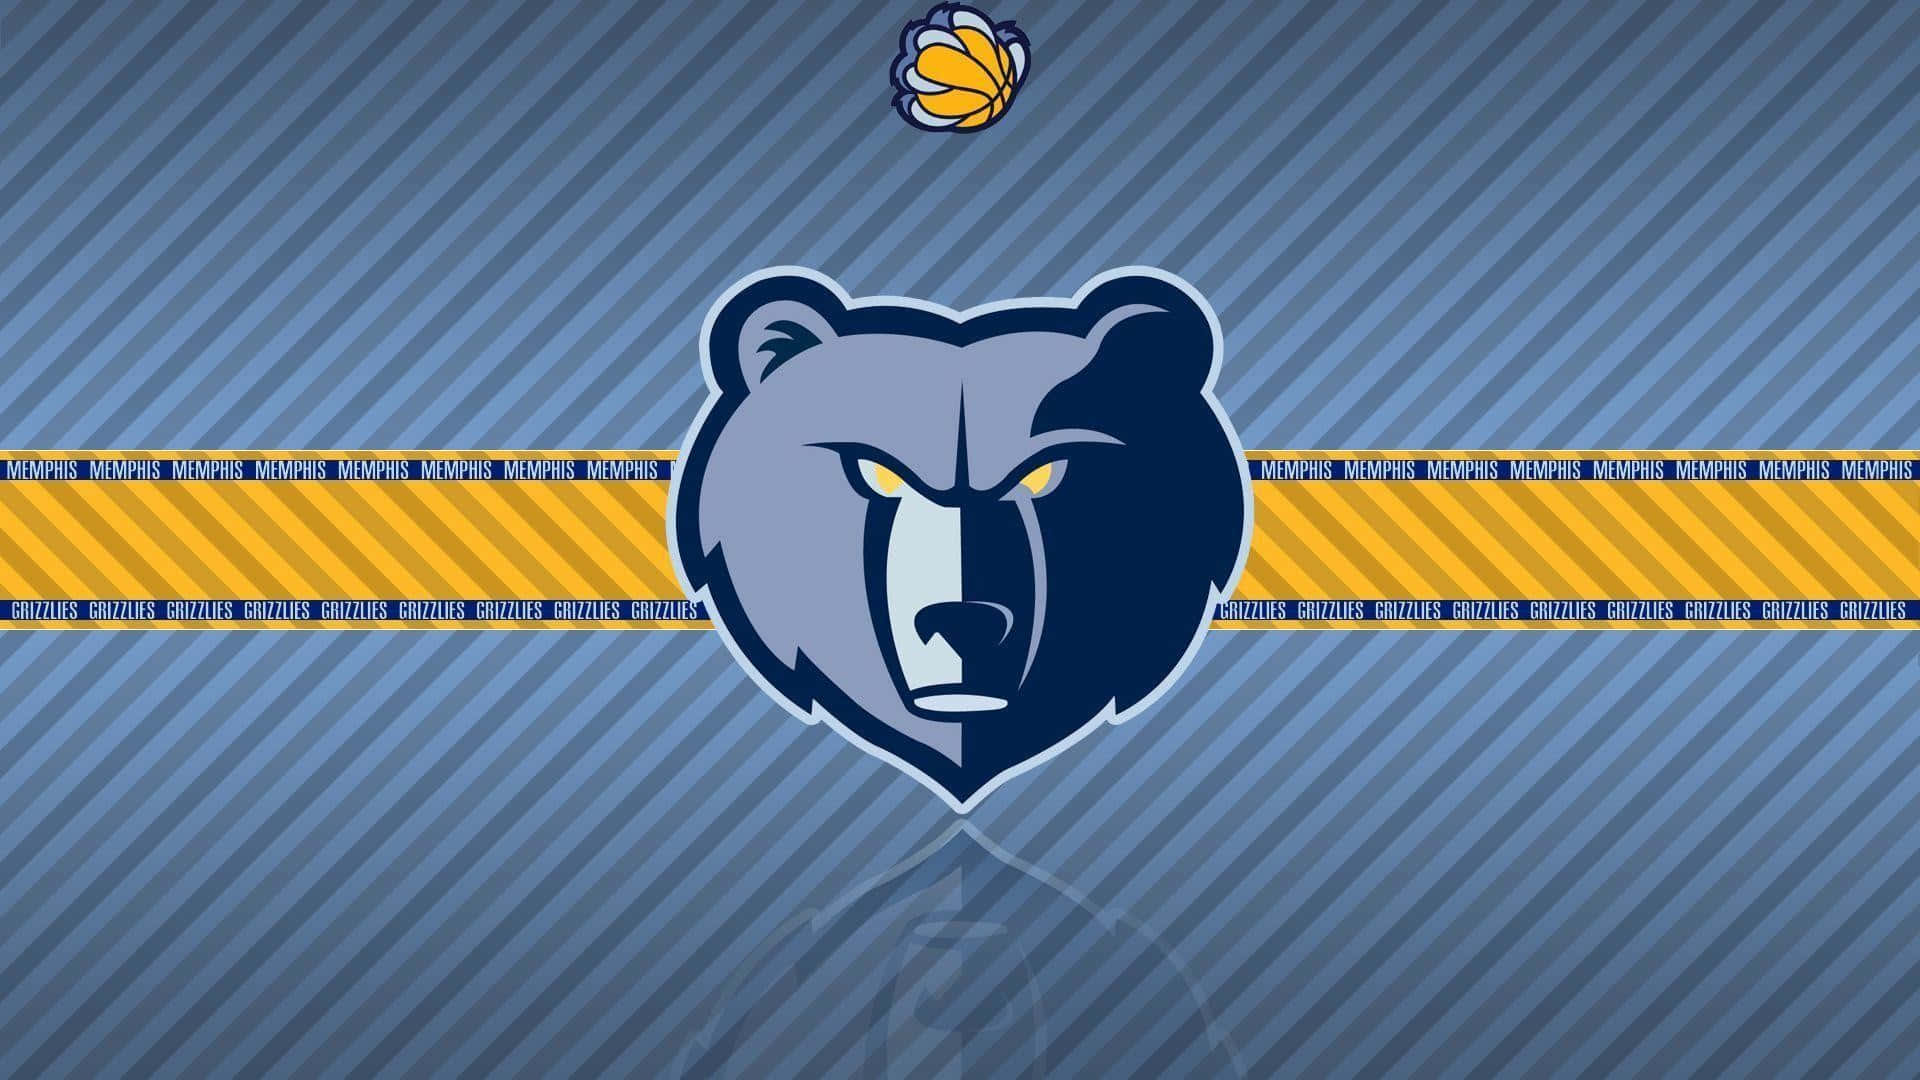 Show Your Team Spirit With The Official Nba Team Logos! Background